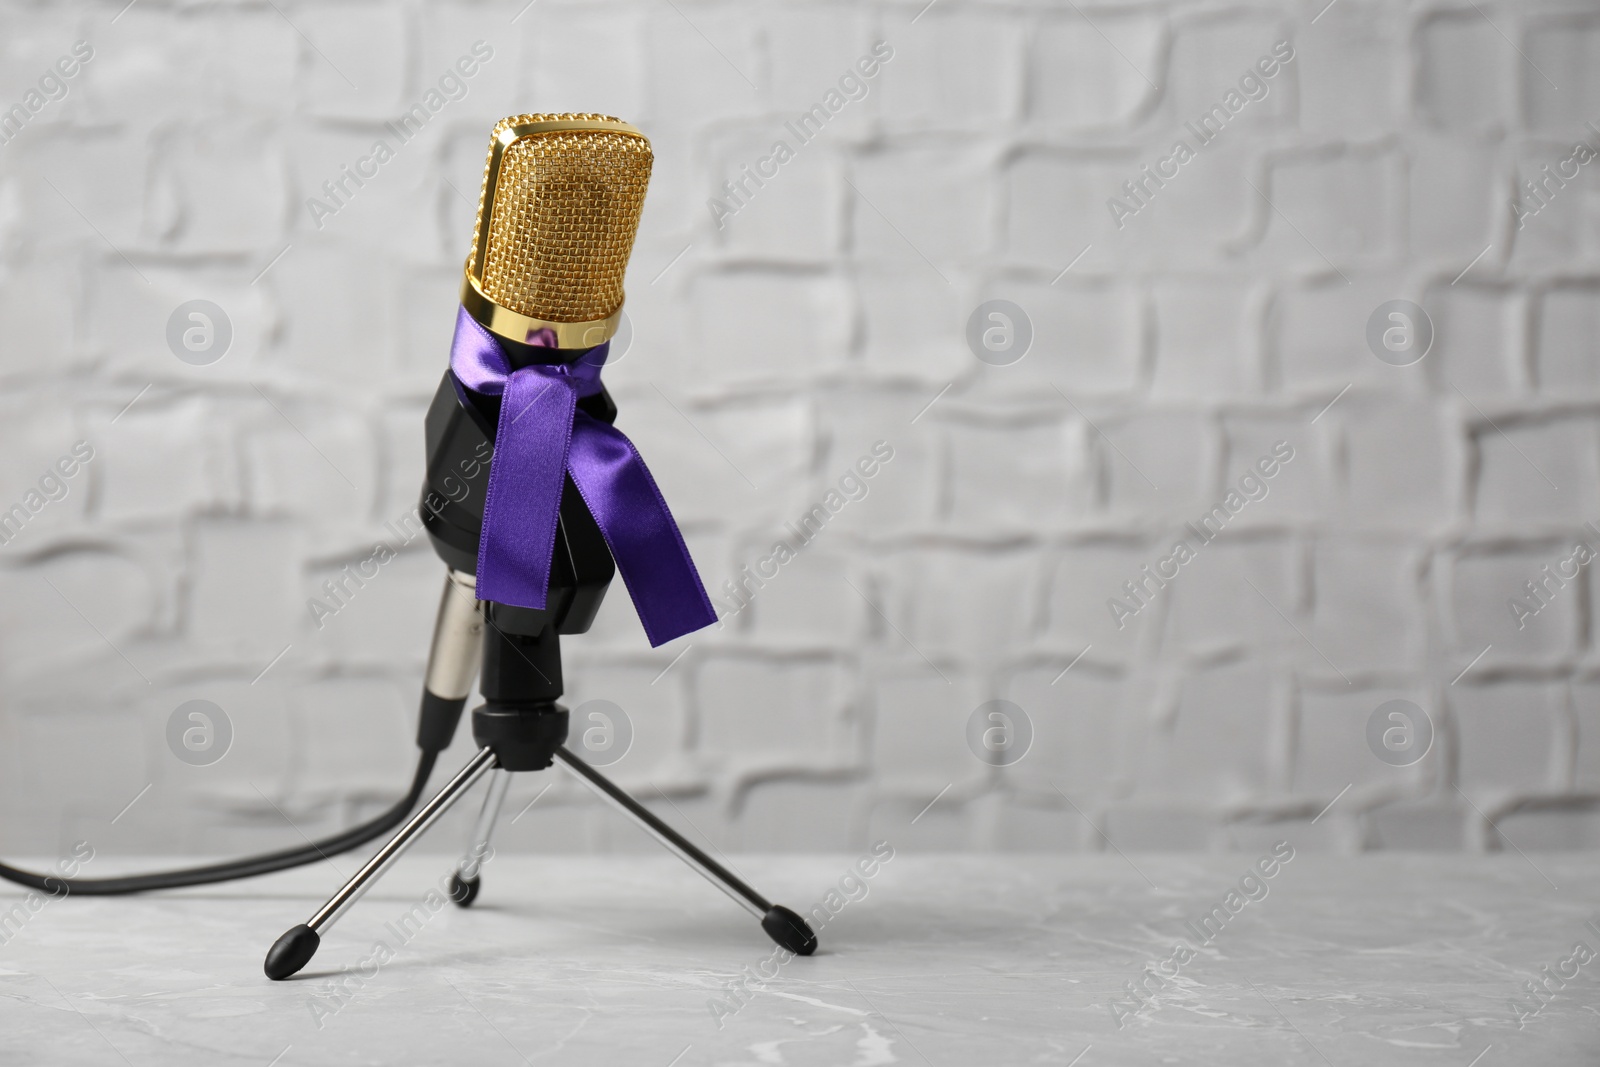 Photo of Microphone with purple awareness ribbon on table against white wall, space for text